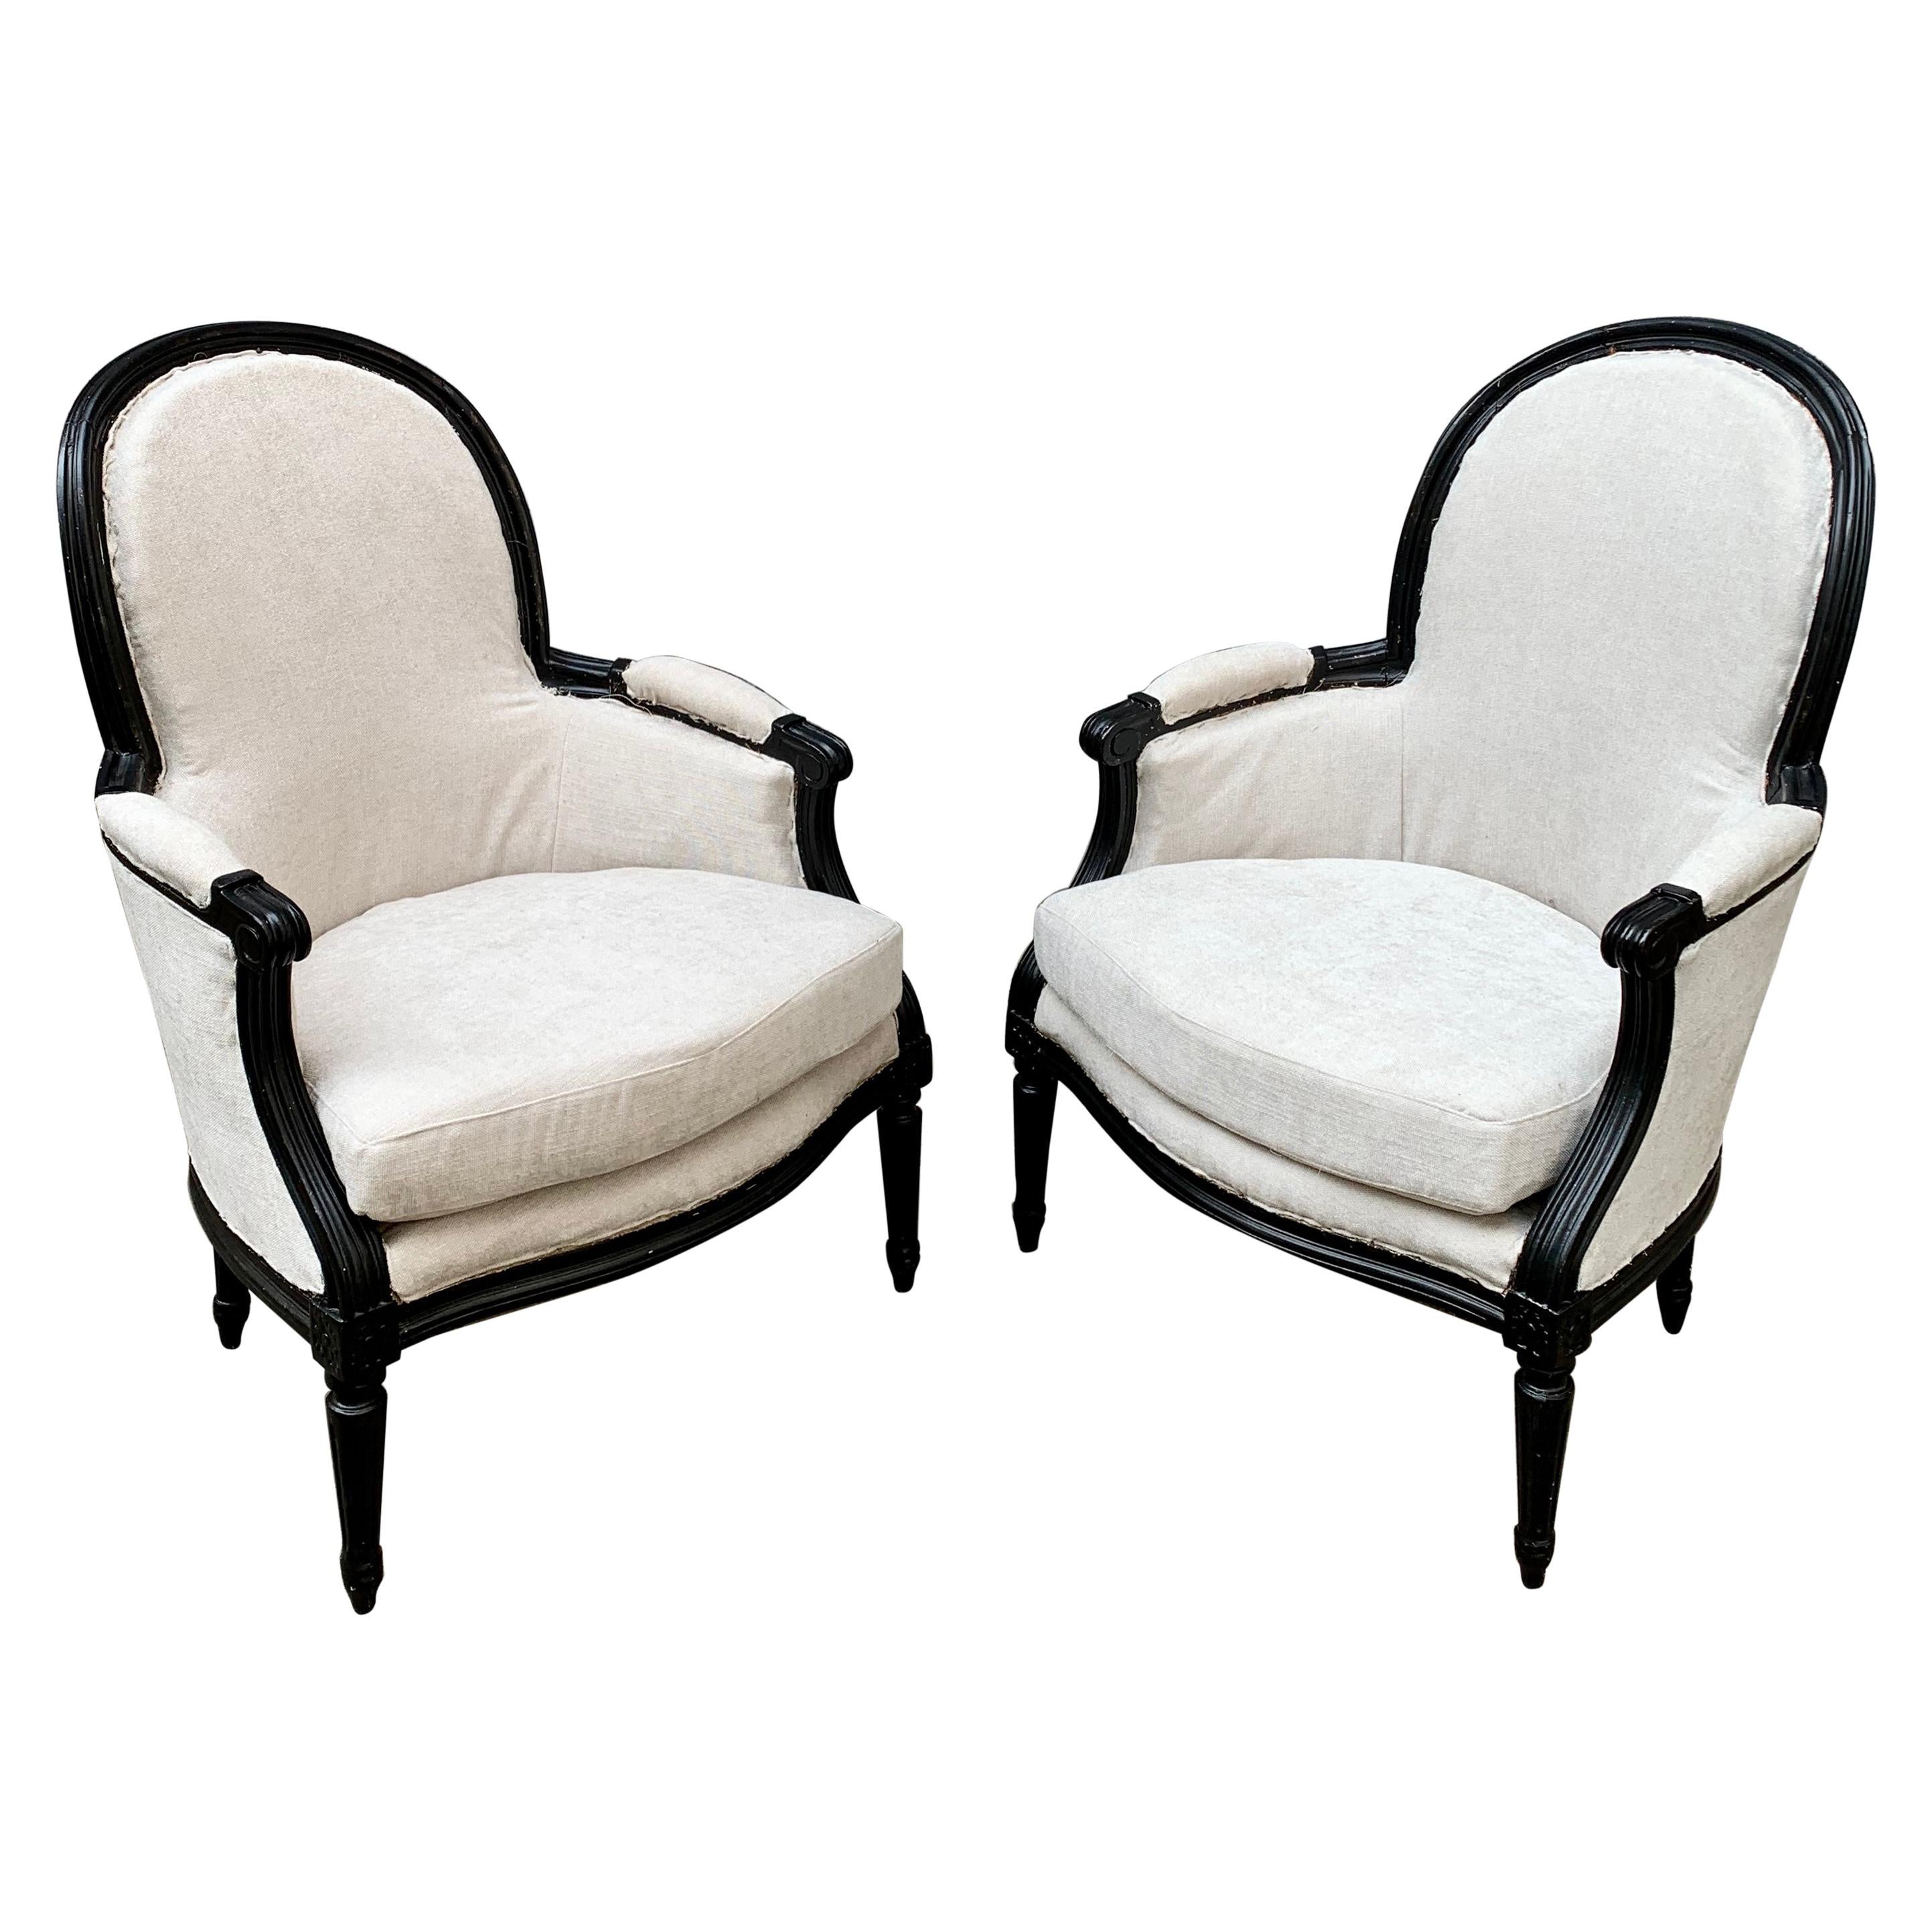 Pair of French Black Painted Louis XVI Styler Bergère Armchairs